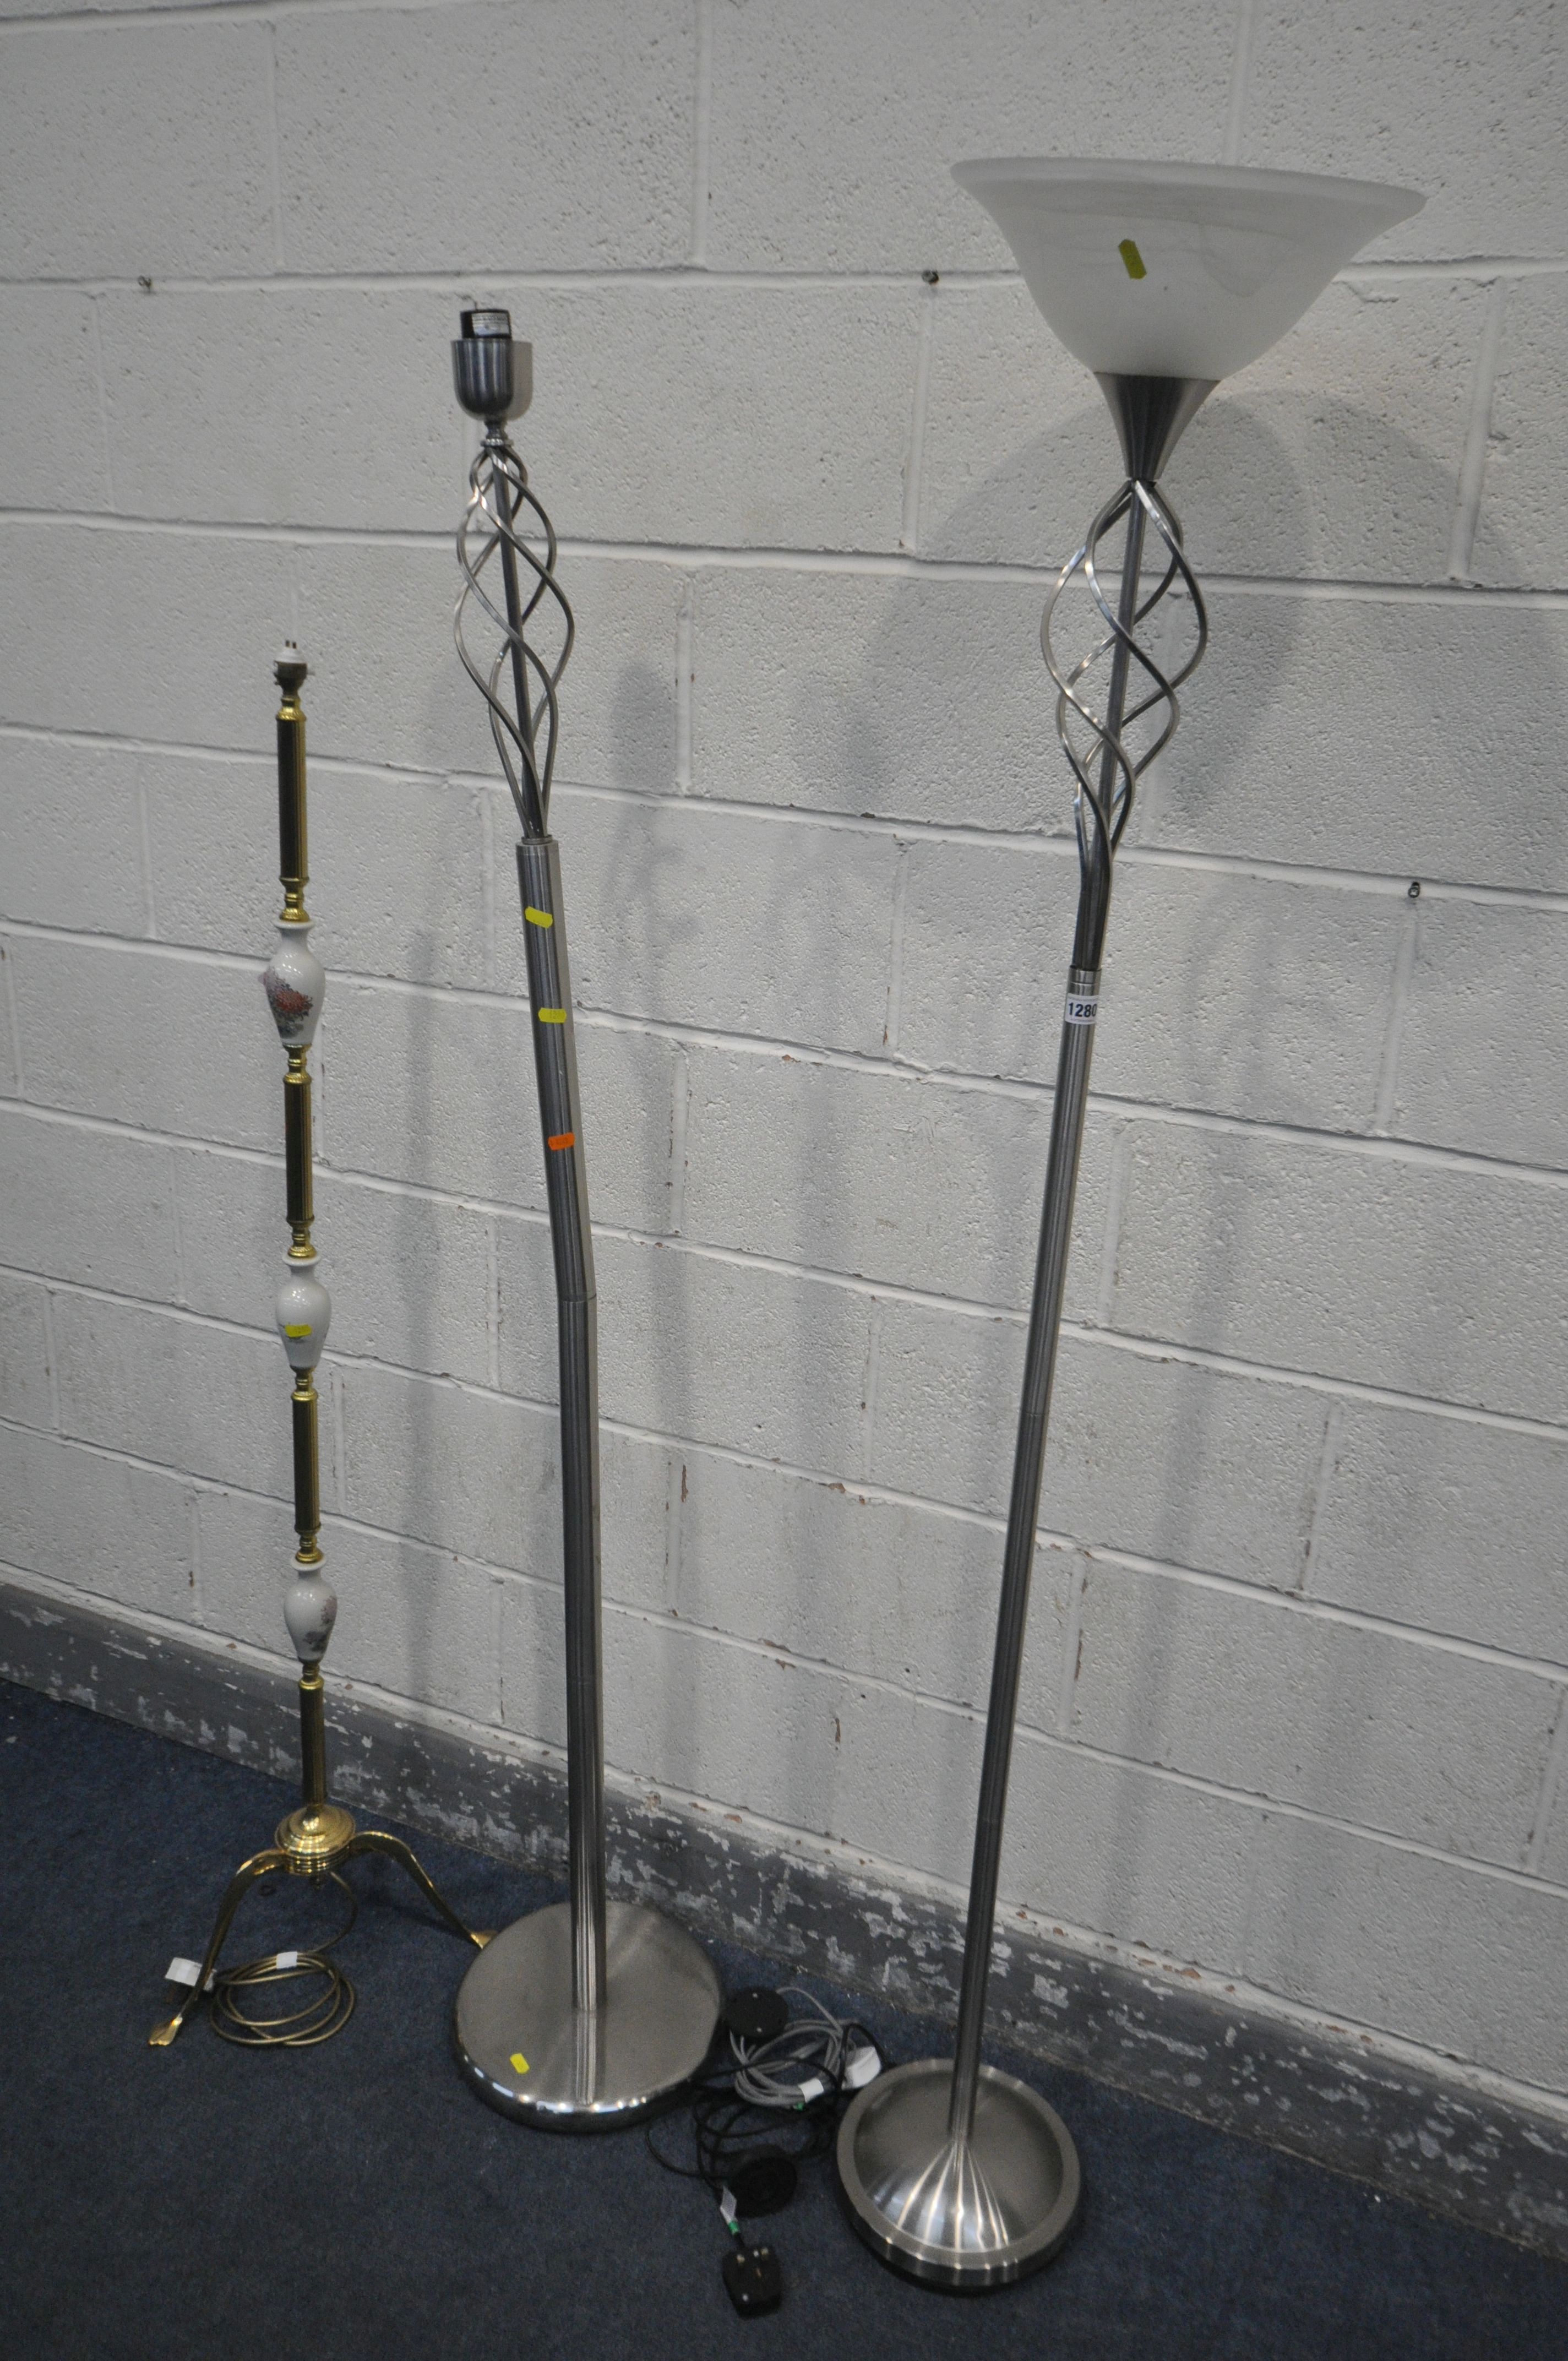 THREE VARIOUS STANDARD LAMPS, with no shades (condition - the two similar standard lamps with